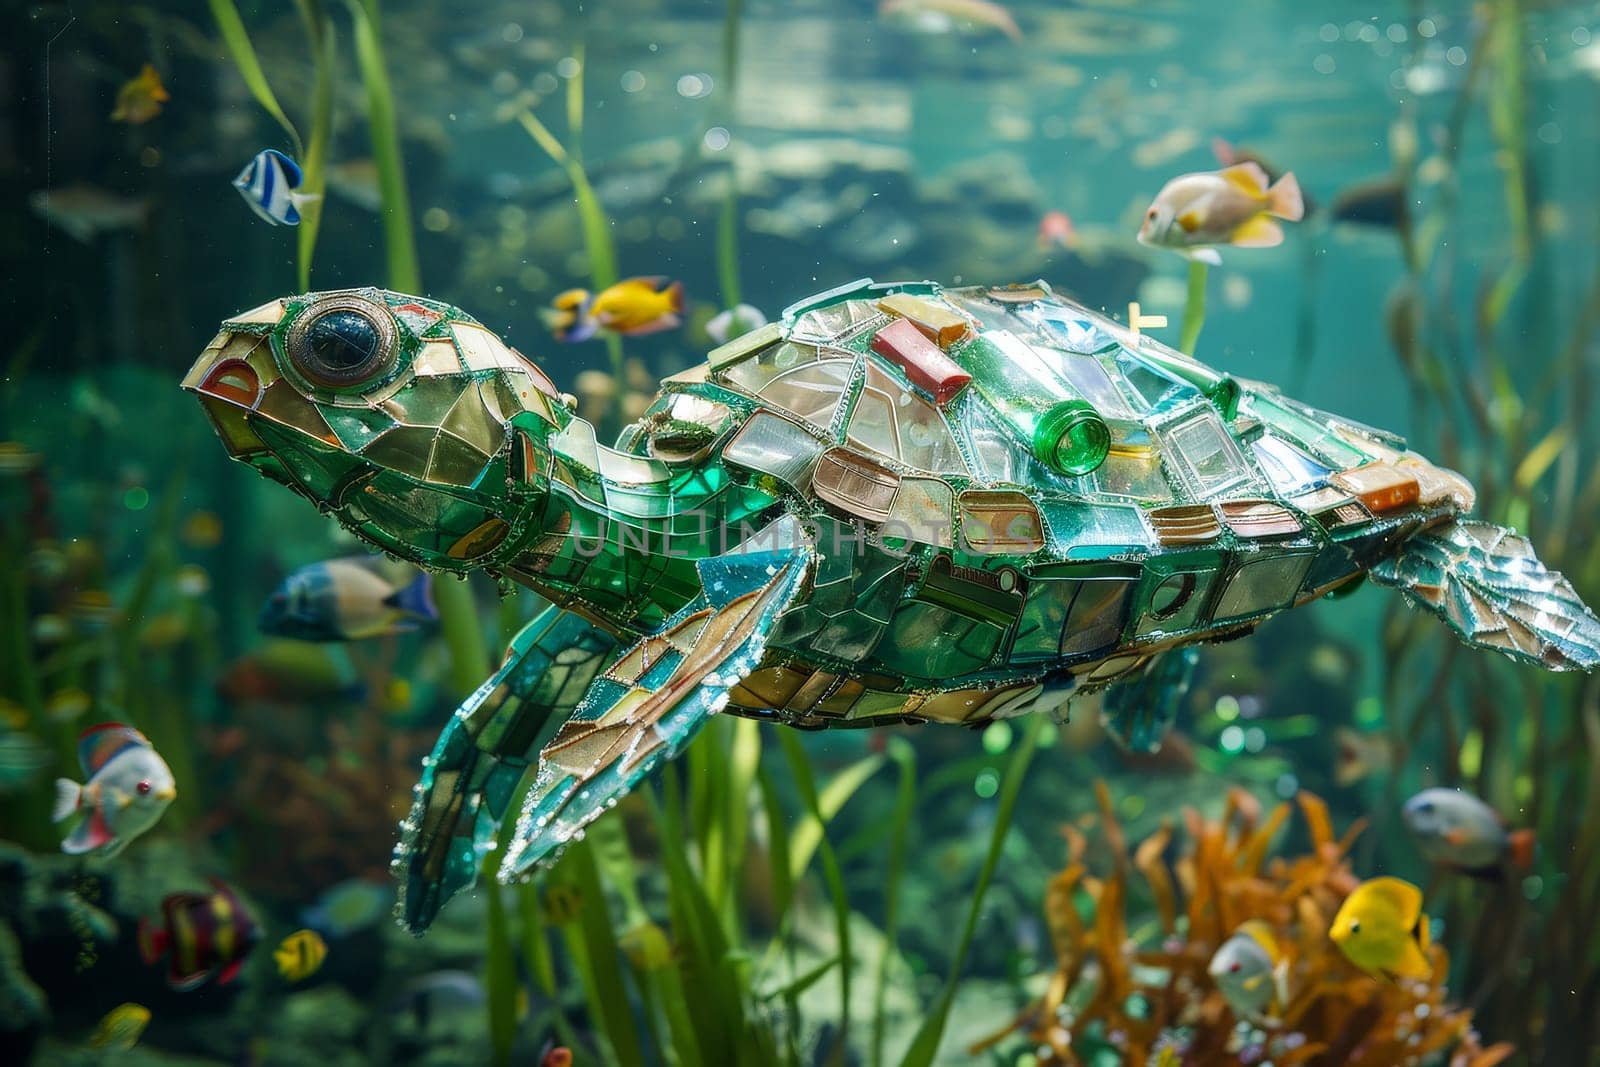 Plastic Pollution In Ocean, a turtle made of plastic bottles, cups and trash swimming in the sea by nijieimu